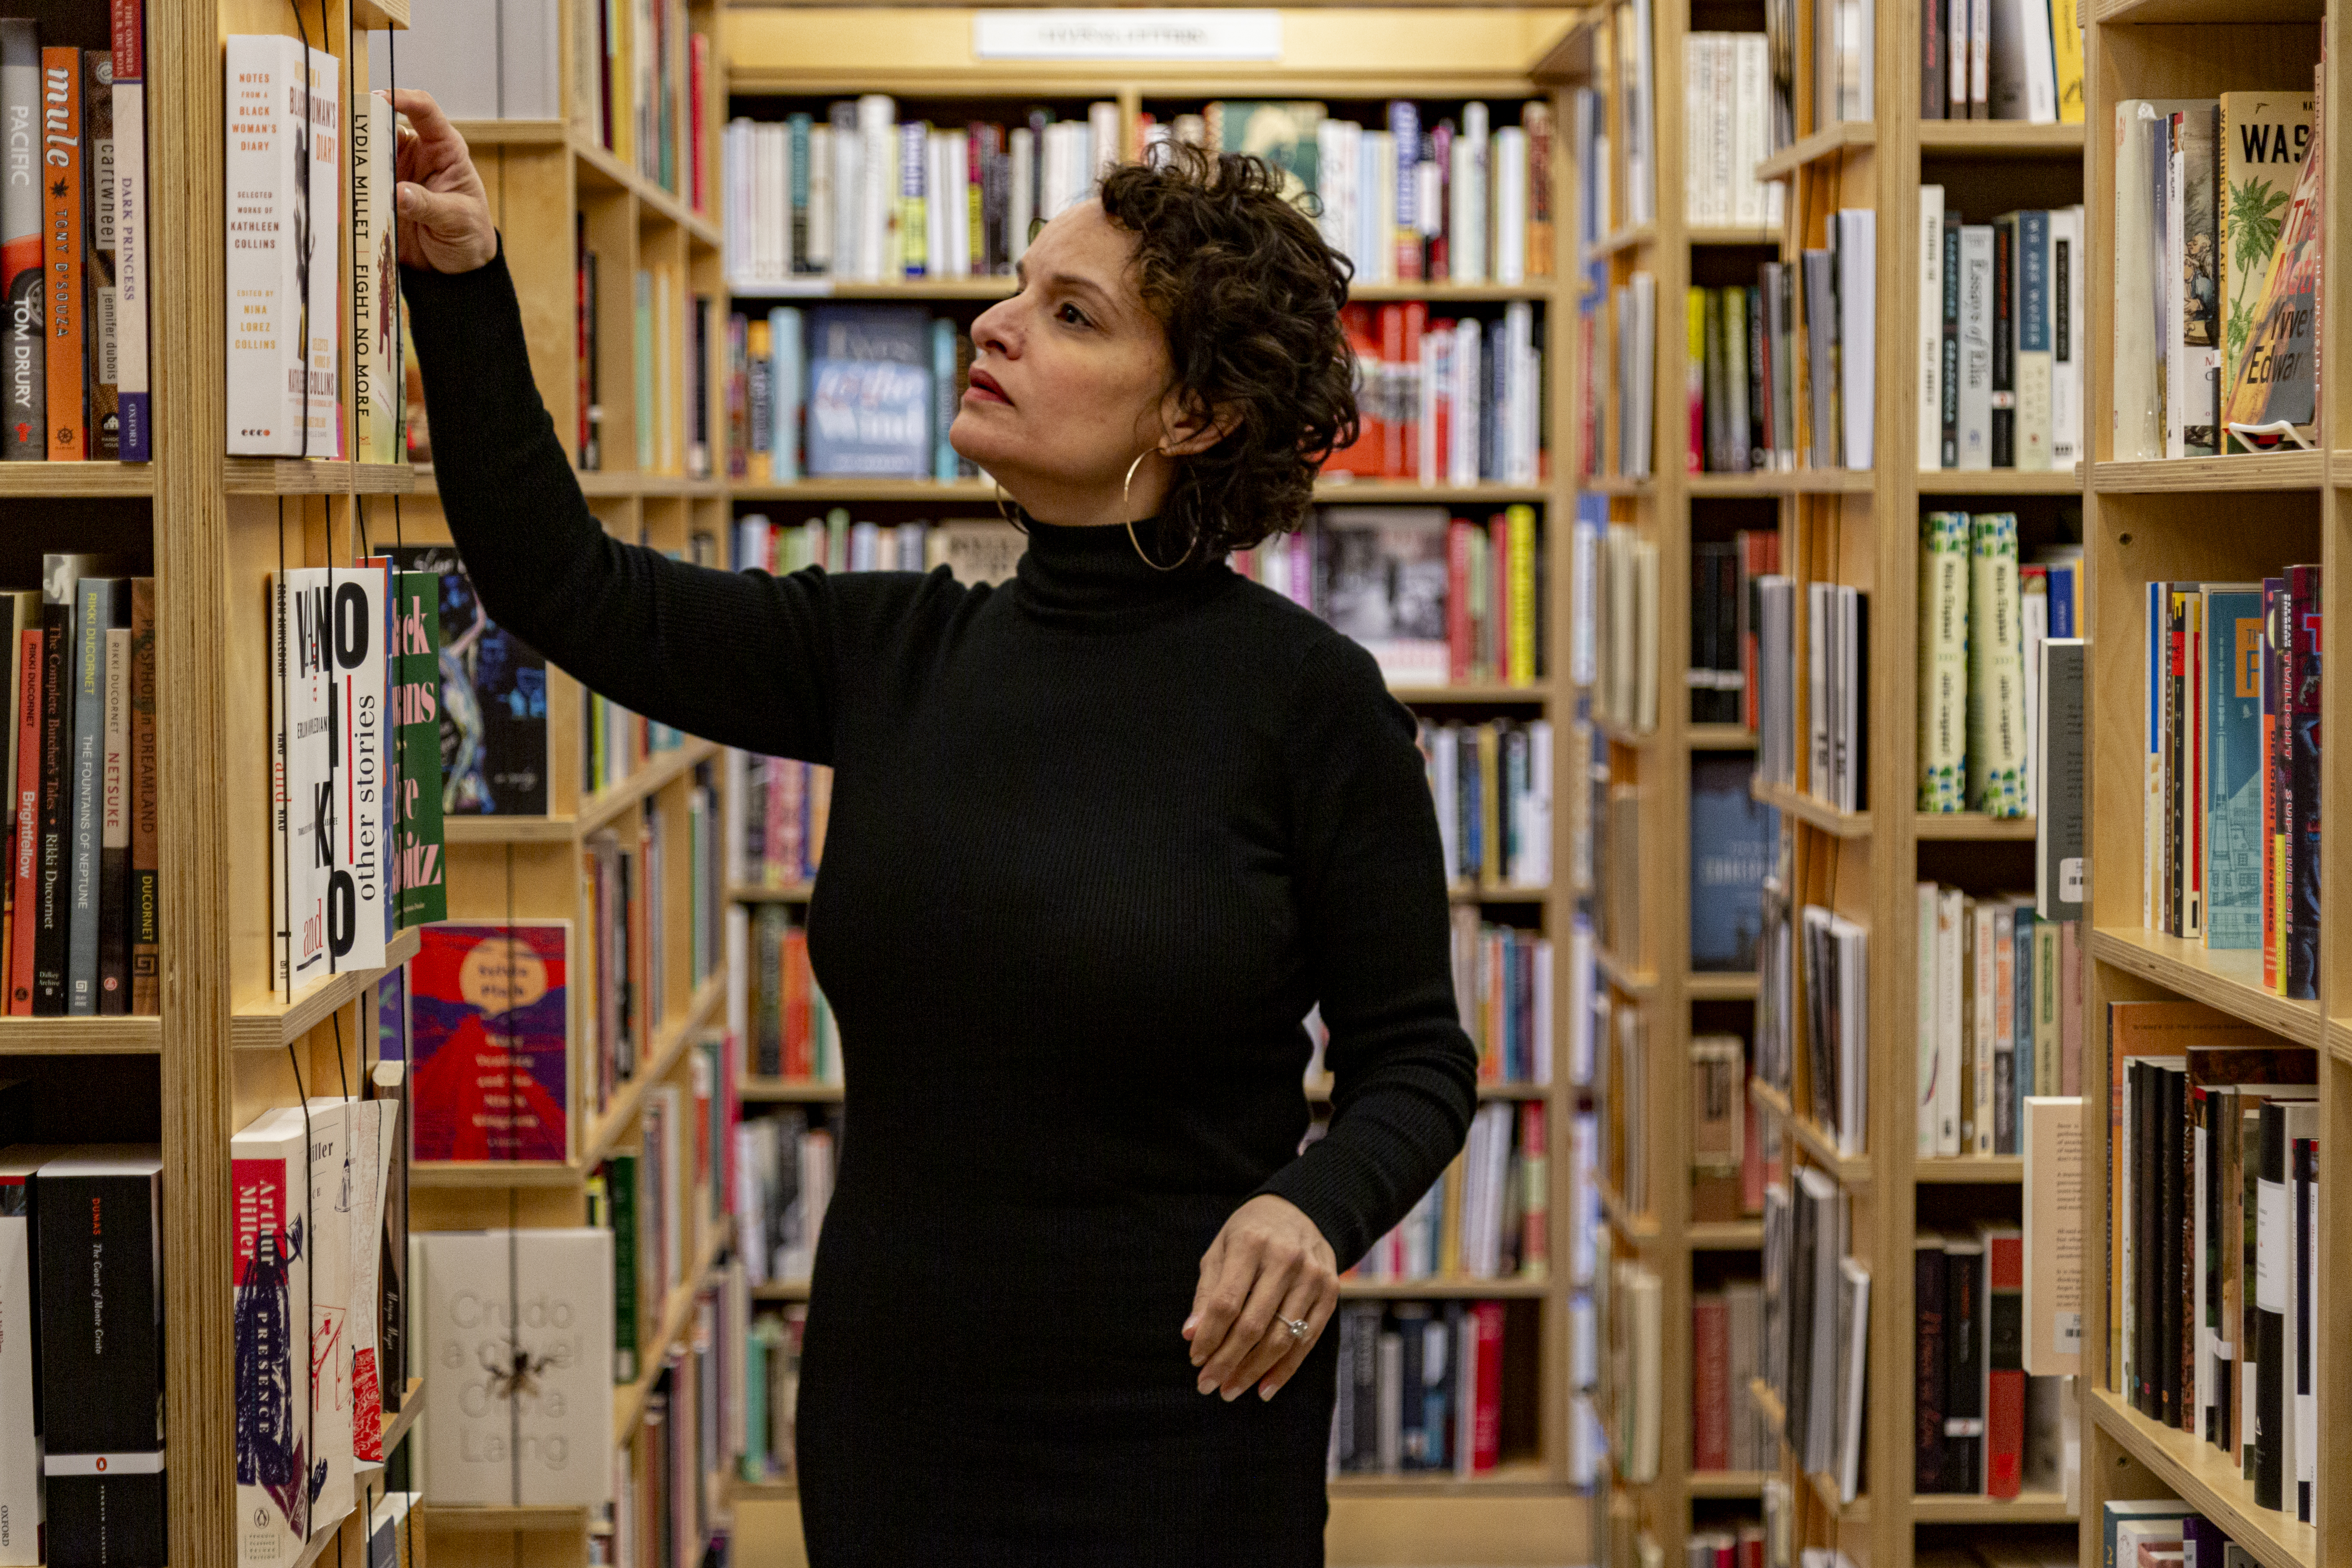 Image: Mustafah stands inside a bookstore, reaching up to pull a book off a shelf. She wears a long-sleeved black turtleneck dress and large hoop earrings. Bookshelves full of books fill the space behind and around her. Photo by Mark Blanchard.